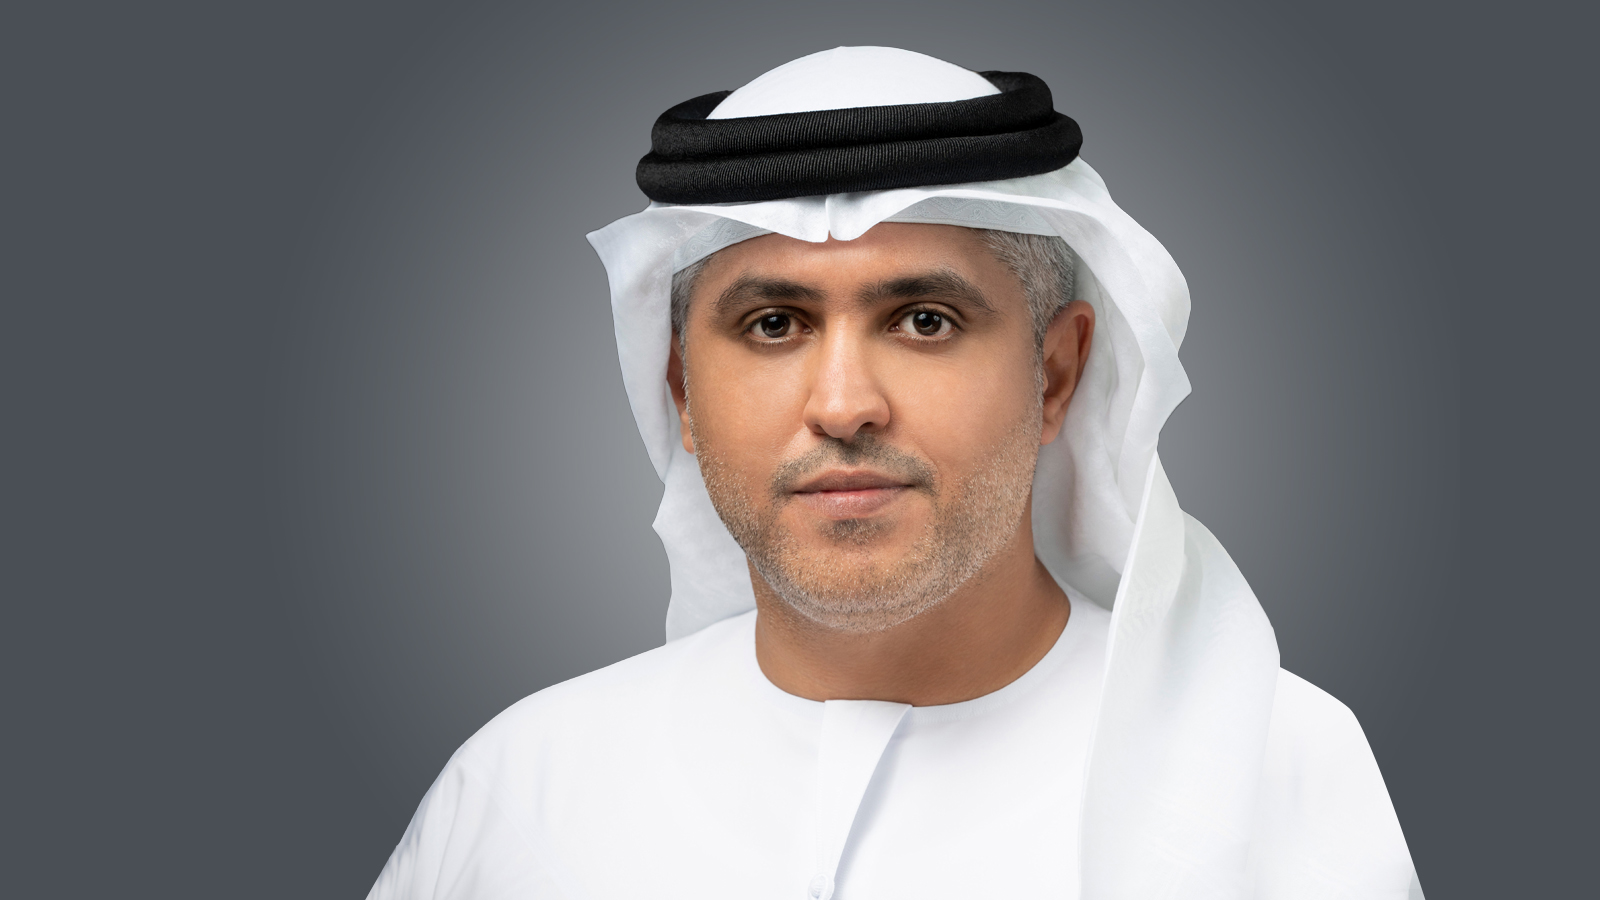 Seeking regional partners, UAE’s Edge Group wants to be ‘not just simply a vendor’: CEO